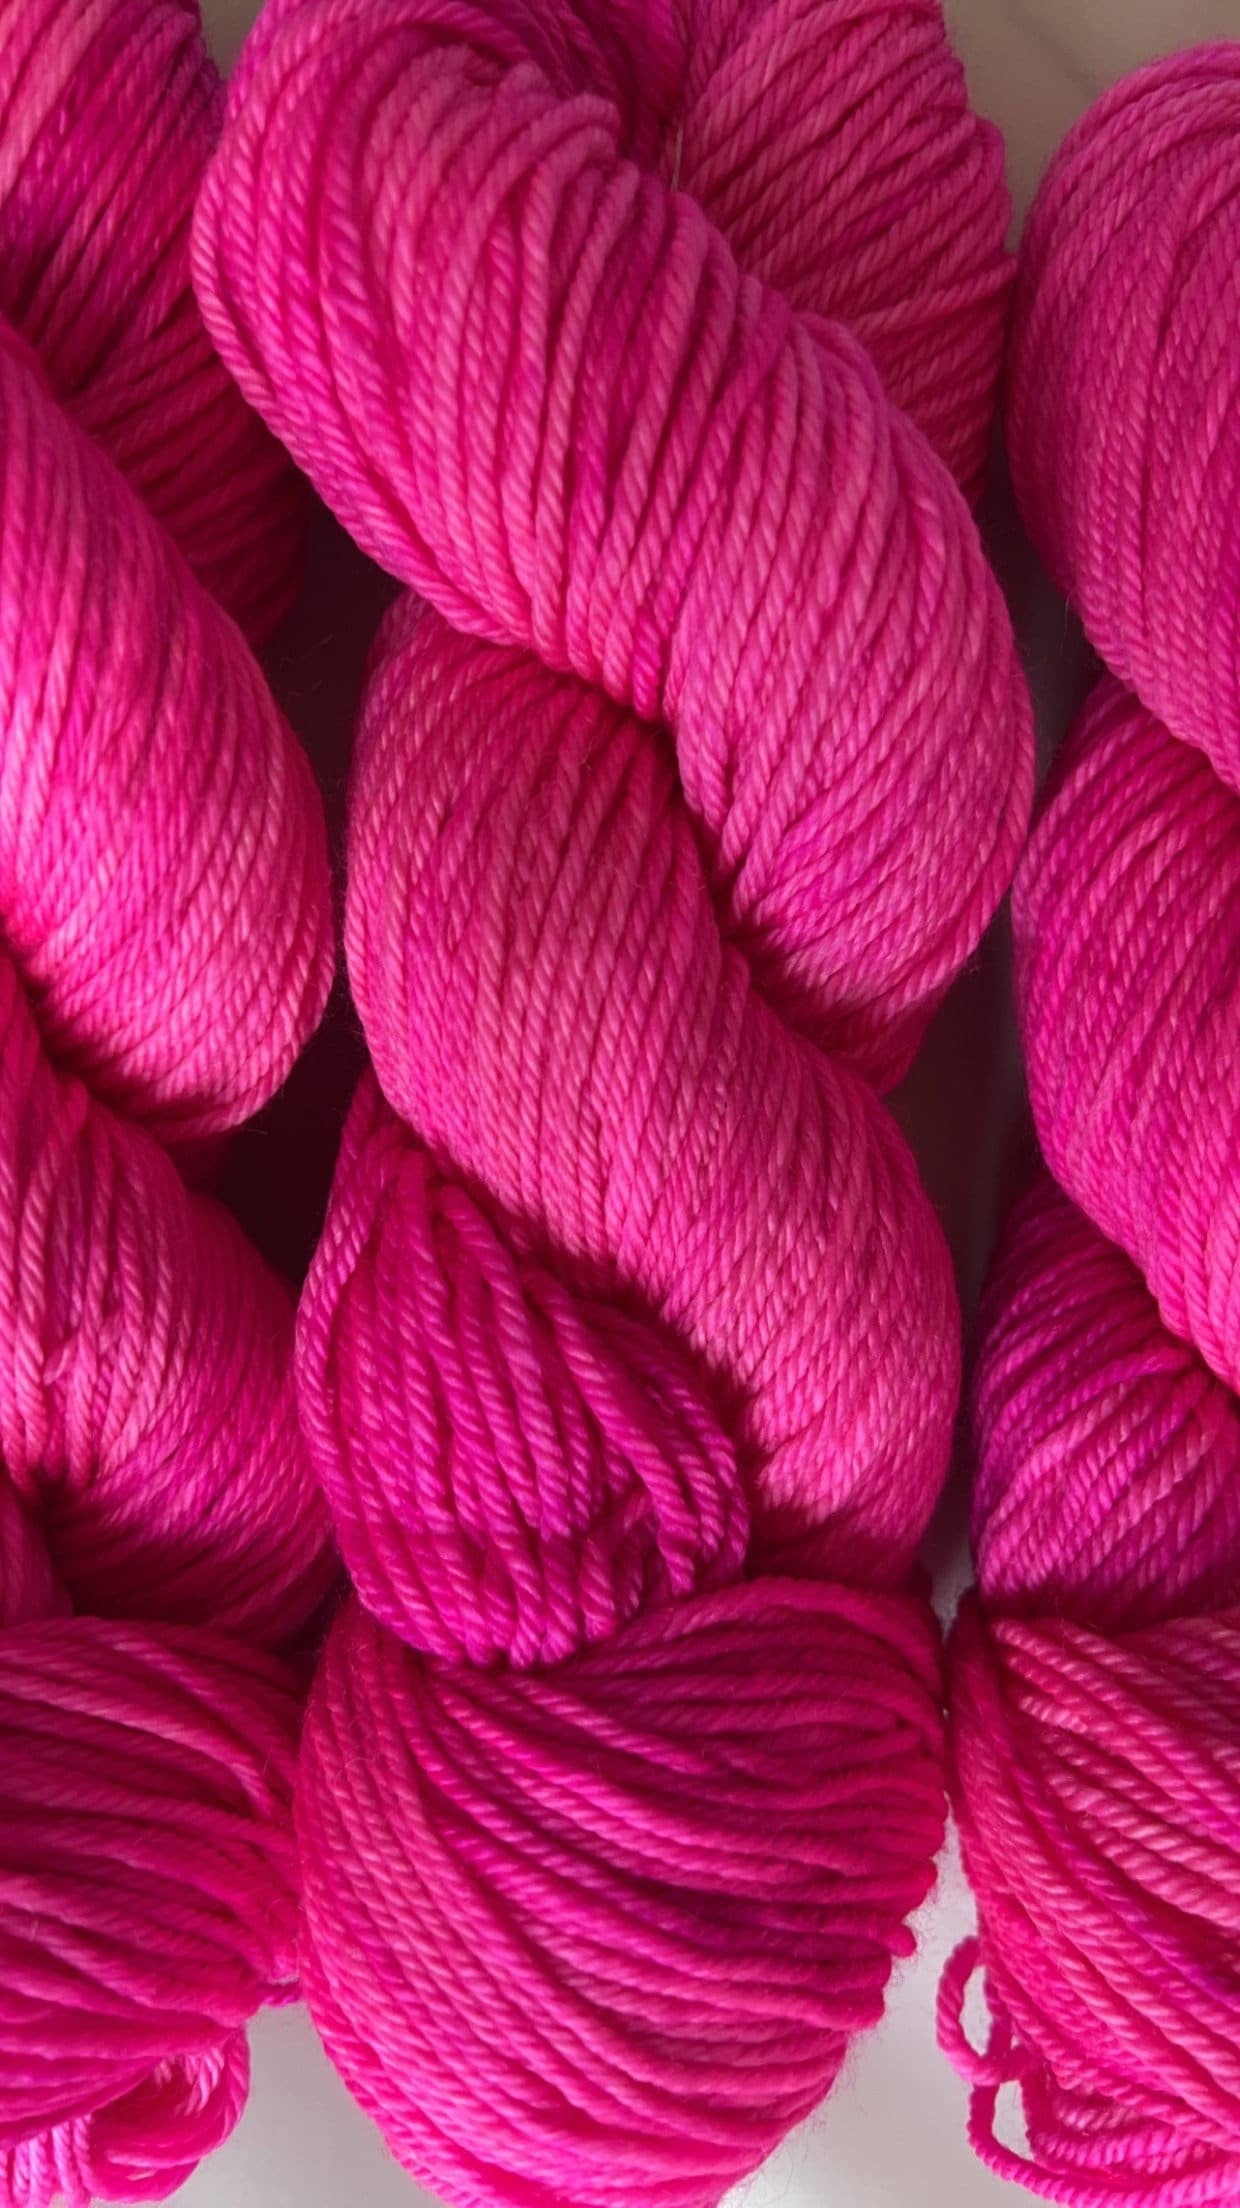 Hand-Dyed Merino Wool Yarn - Soft and Durable Yarn for Knitting and Crocheting | Indie Dyed Merino Wool | Worsted | Pretty In...